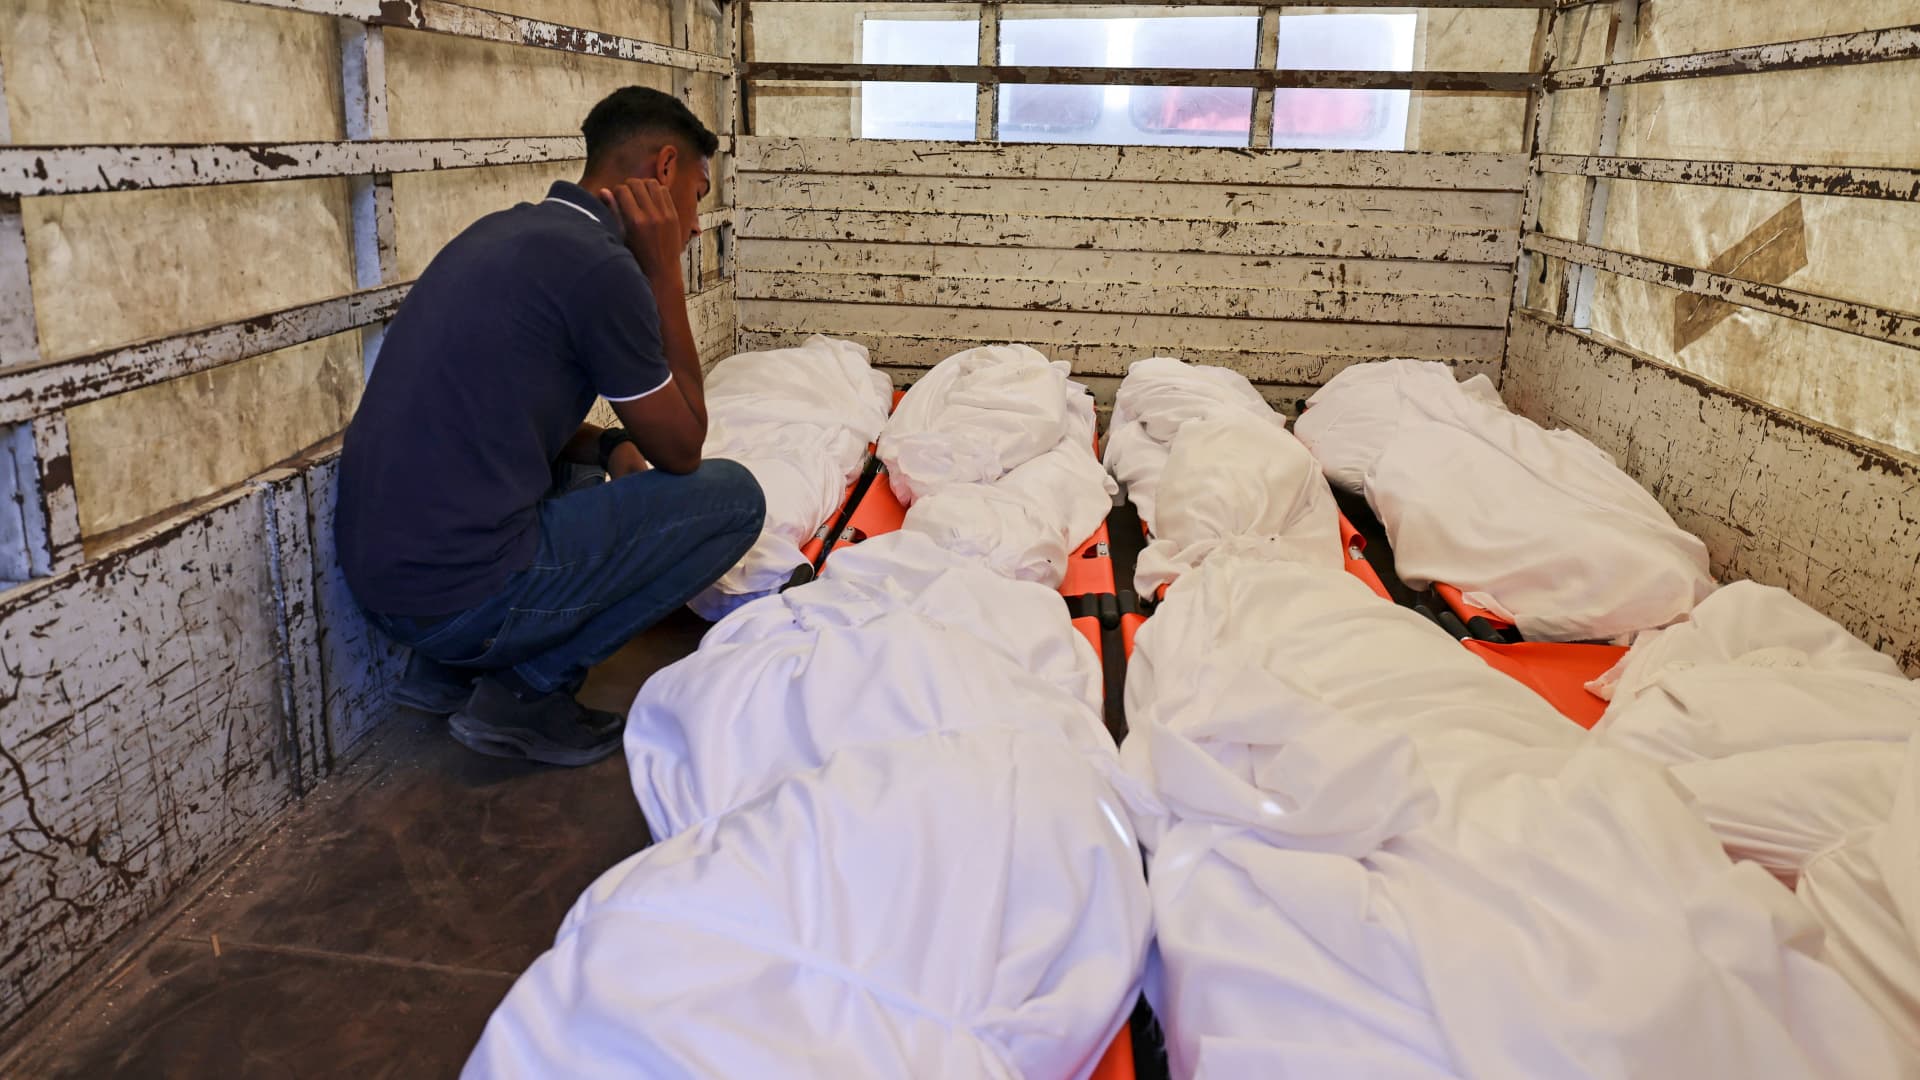 A Palestinian man mourns over the bodies of member of the Kawlak family, who were killed in an Israeli airstrike overnight on Gaza City's Rimal residential district, during preparations for their burial outside the Al-Shifa Hospital on May 16, 2021.